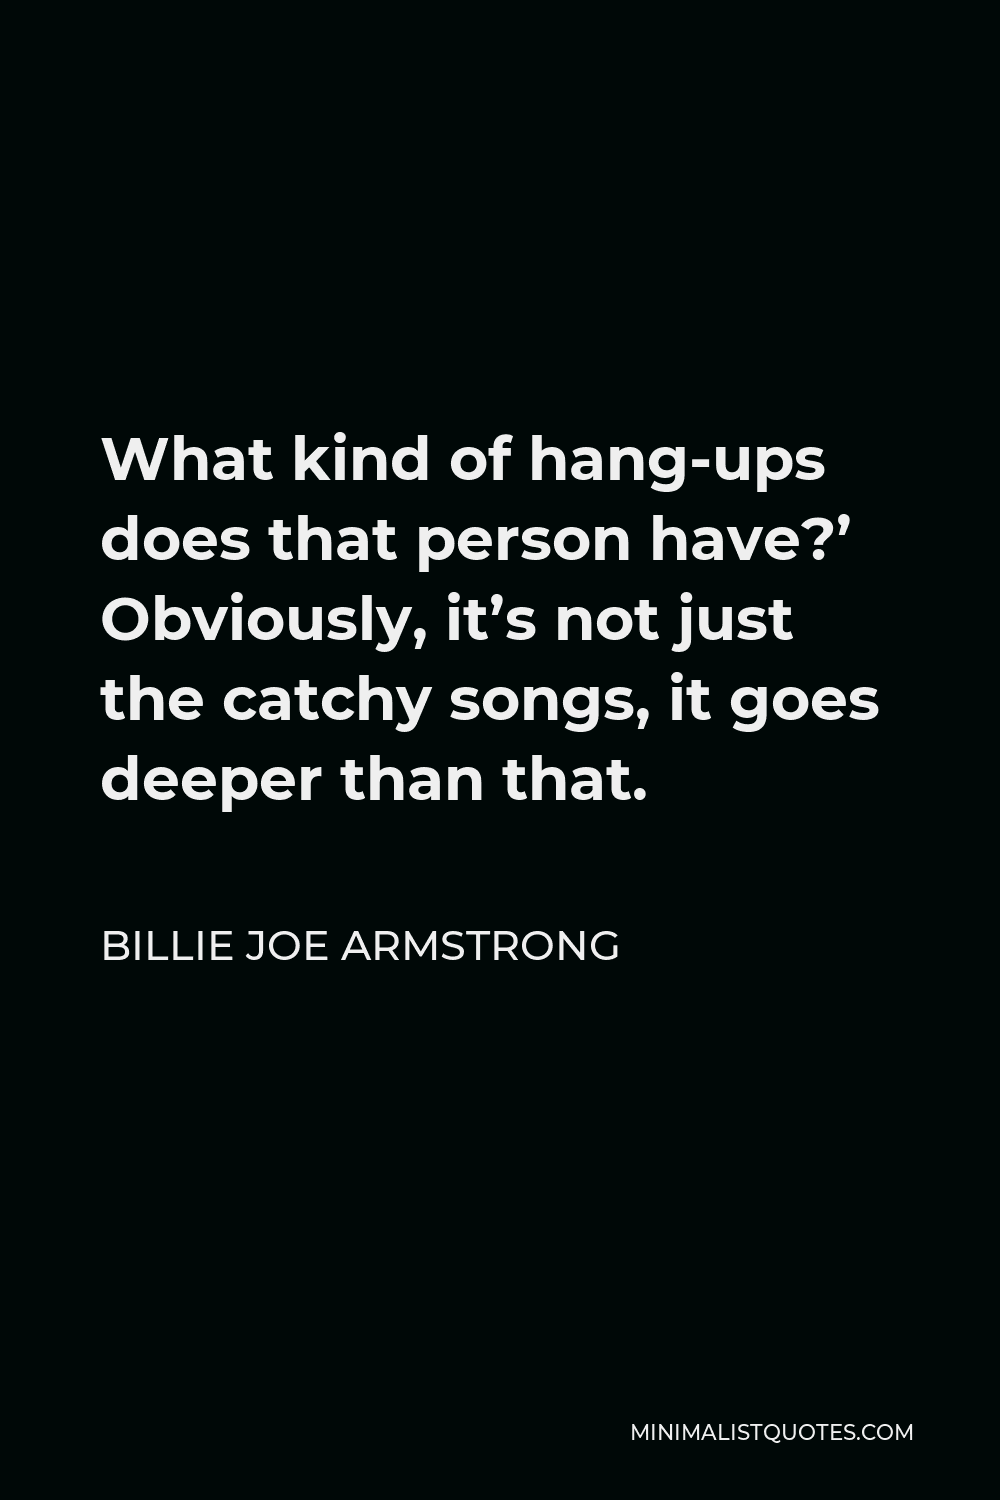 Billie Joe Armstrong Quote - What kind of hang-ups does that person have?’ Obviously, it’s not just the catchy songs, it goes deeper than that.